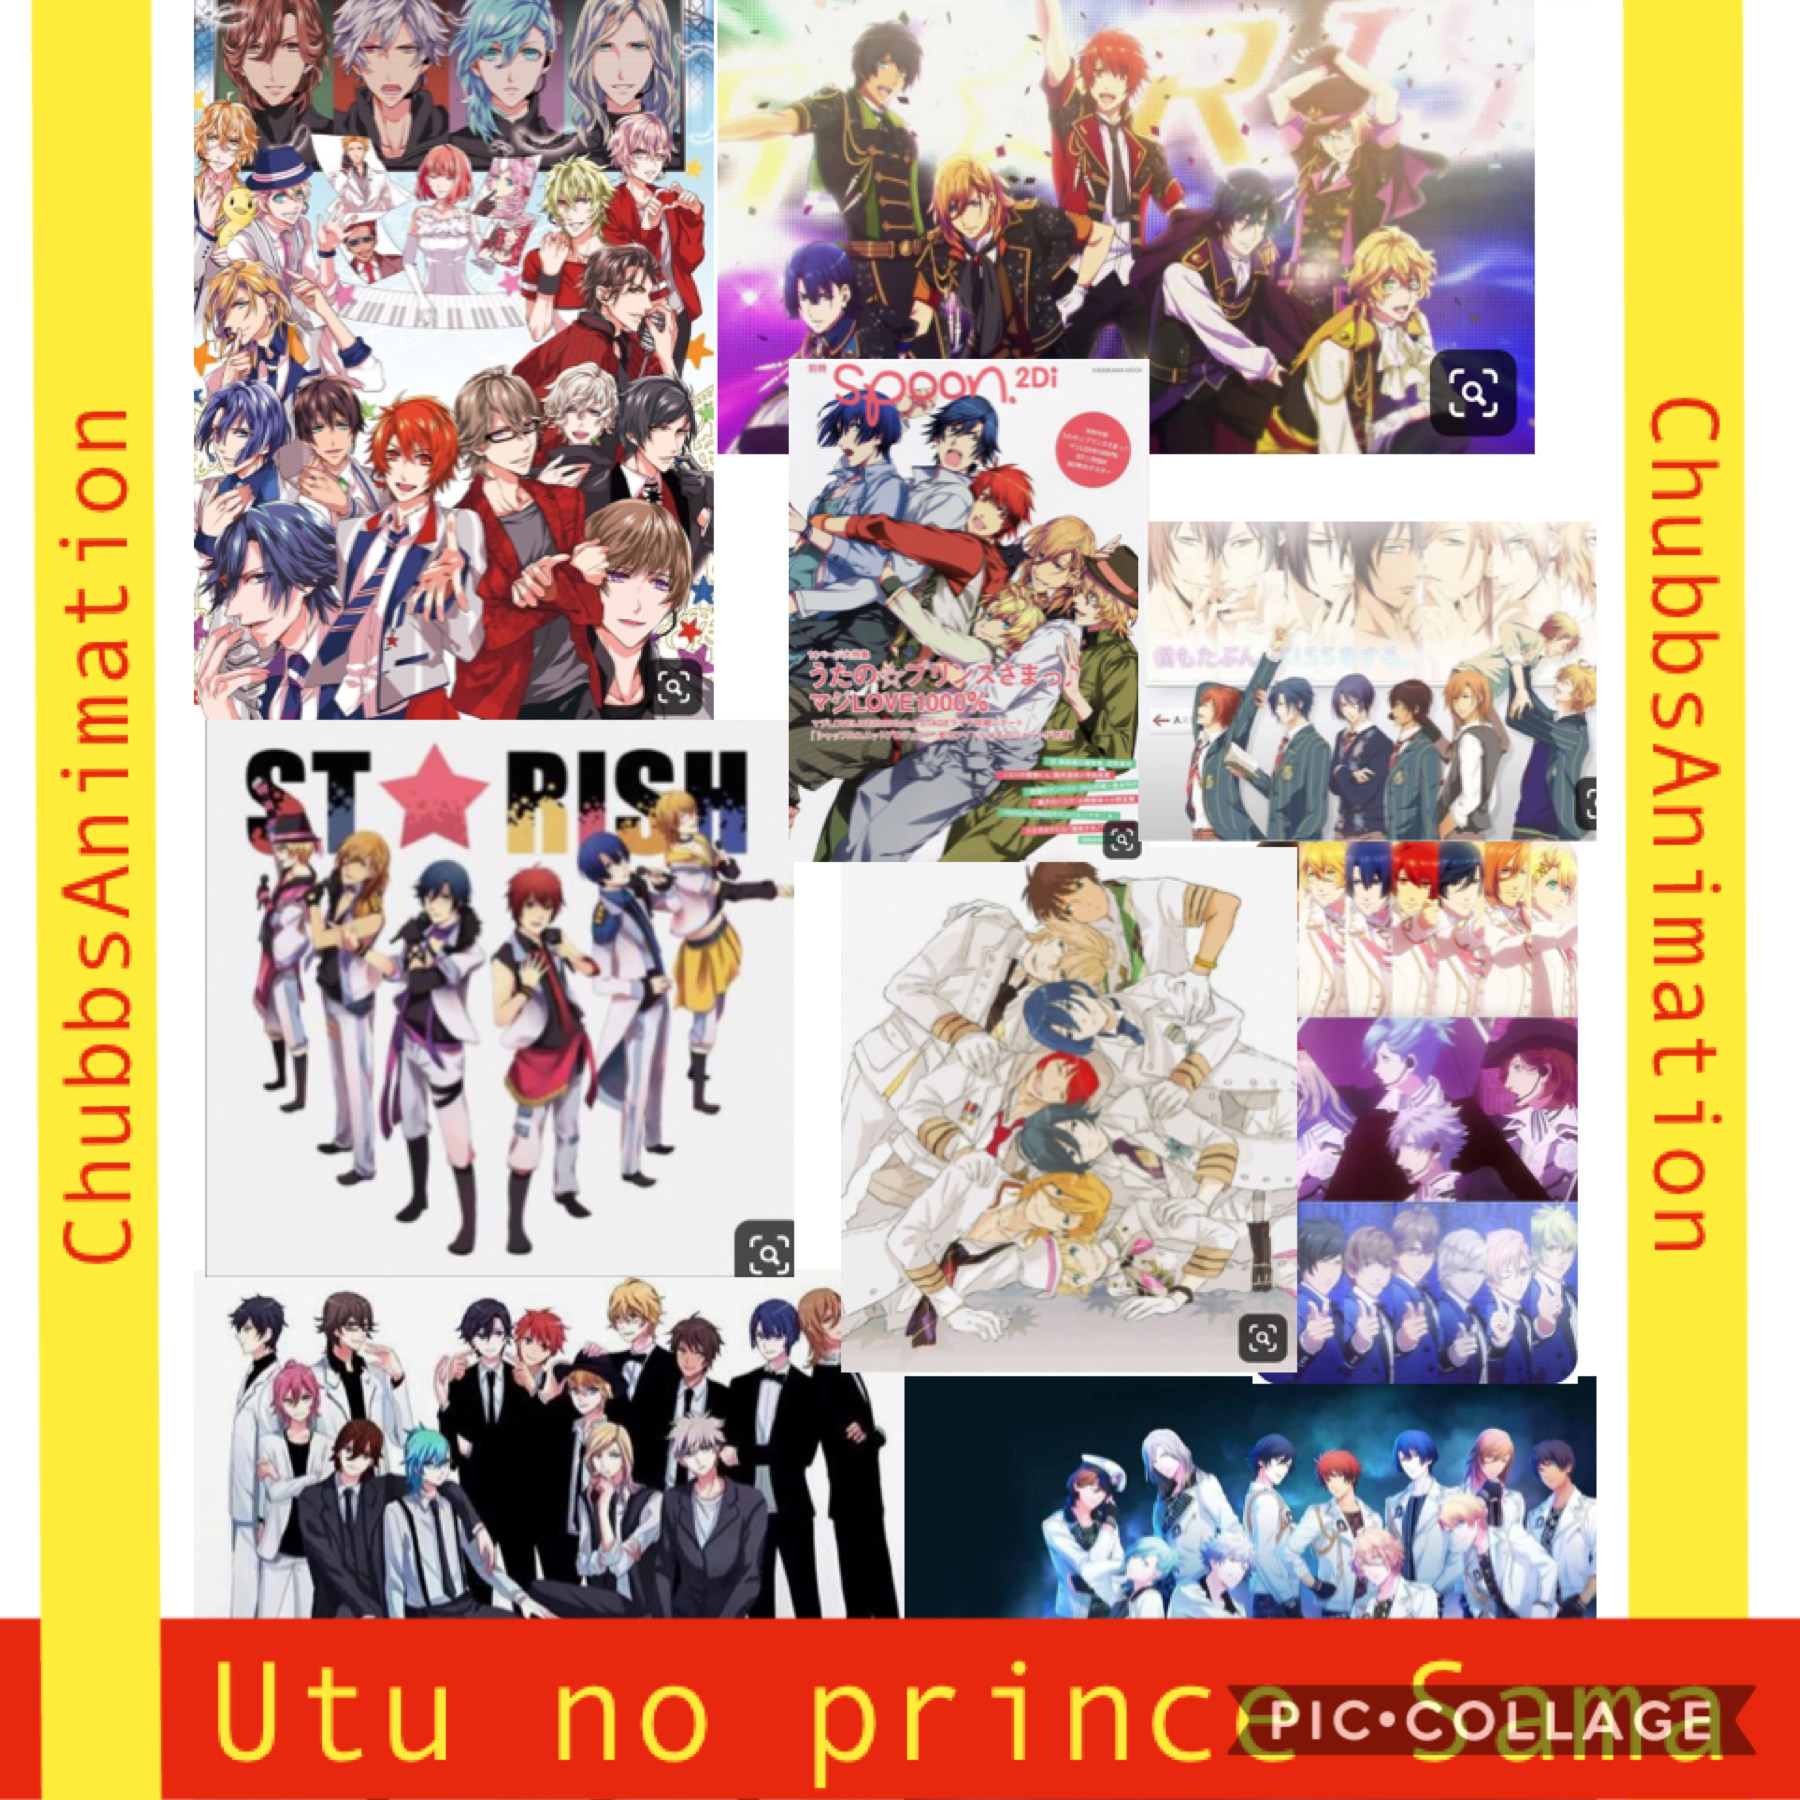 Uta no prince Sama go watch it it’s one of the best anime shows you can watch it on crunchy and Hulu 